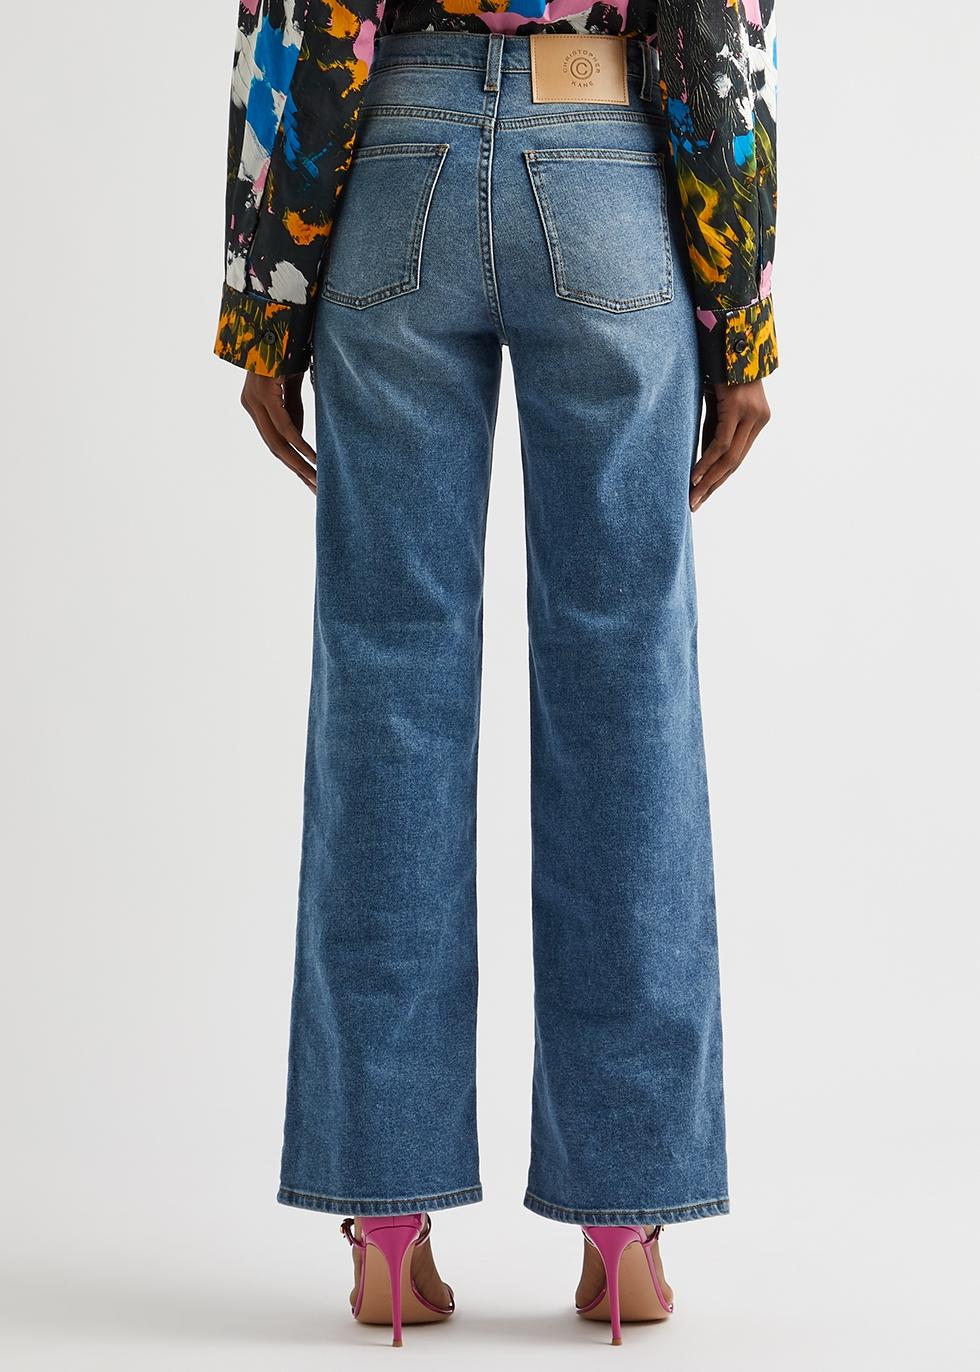 Christopher Kane Chain-embellished Straight-leg Jeans in Blue | Lyst